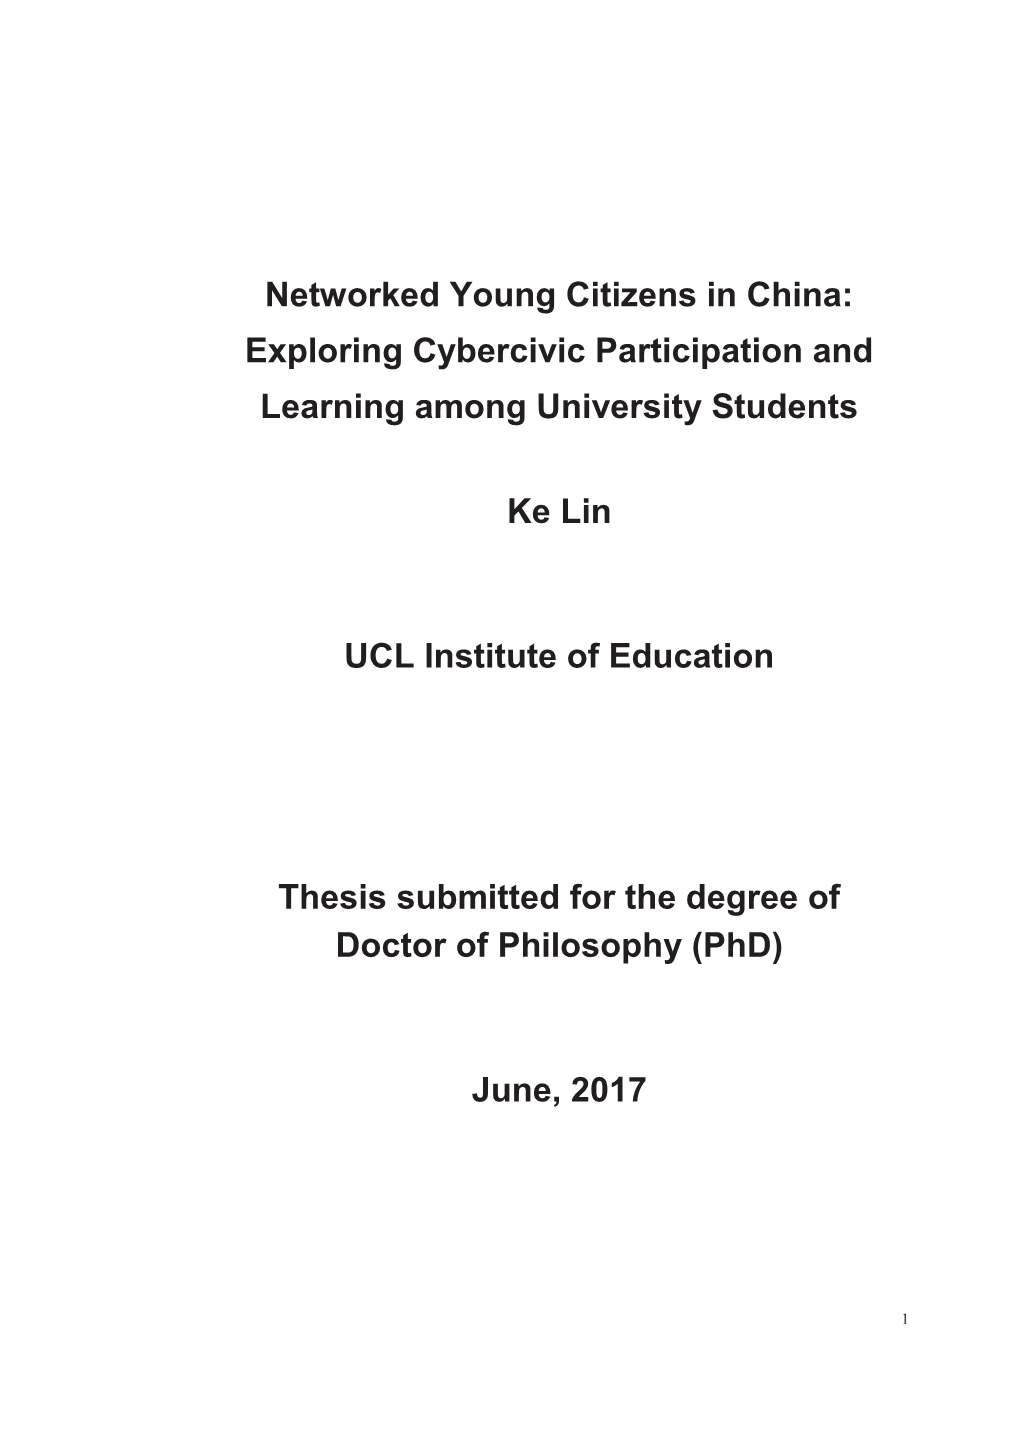 Networked Young Citizens in China: Exploring Cybercivic Participation and Learning Among University Students